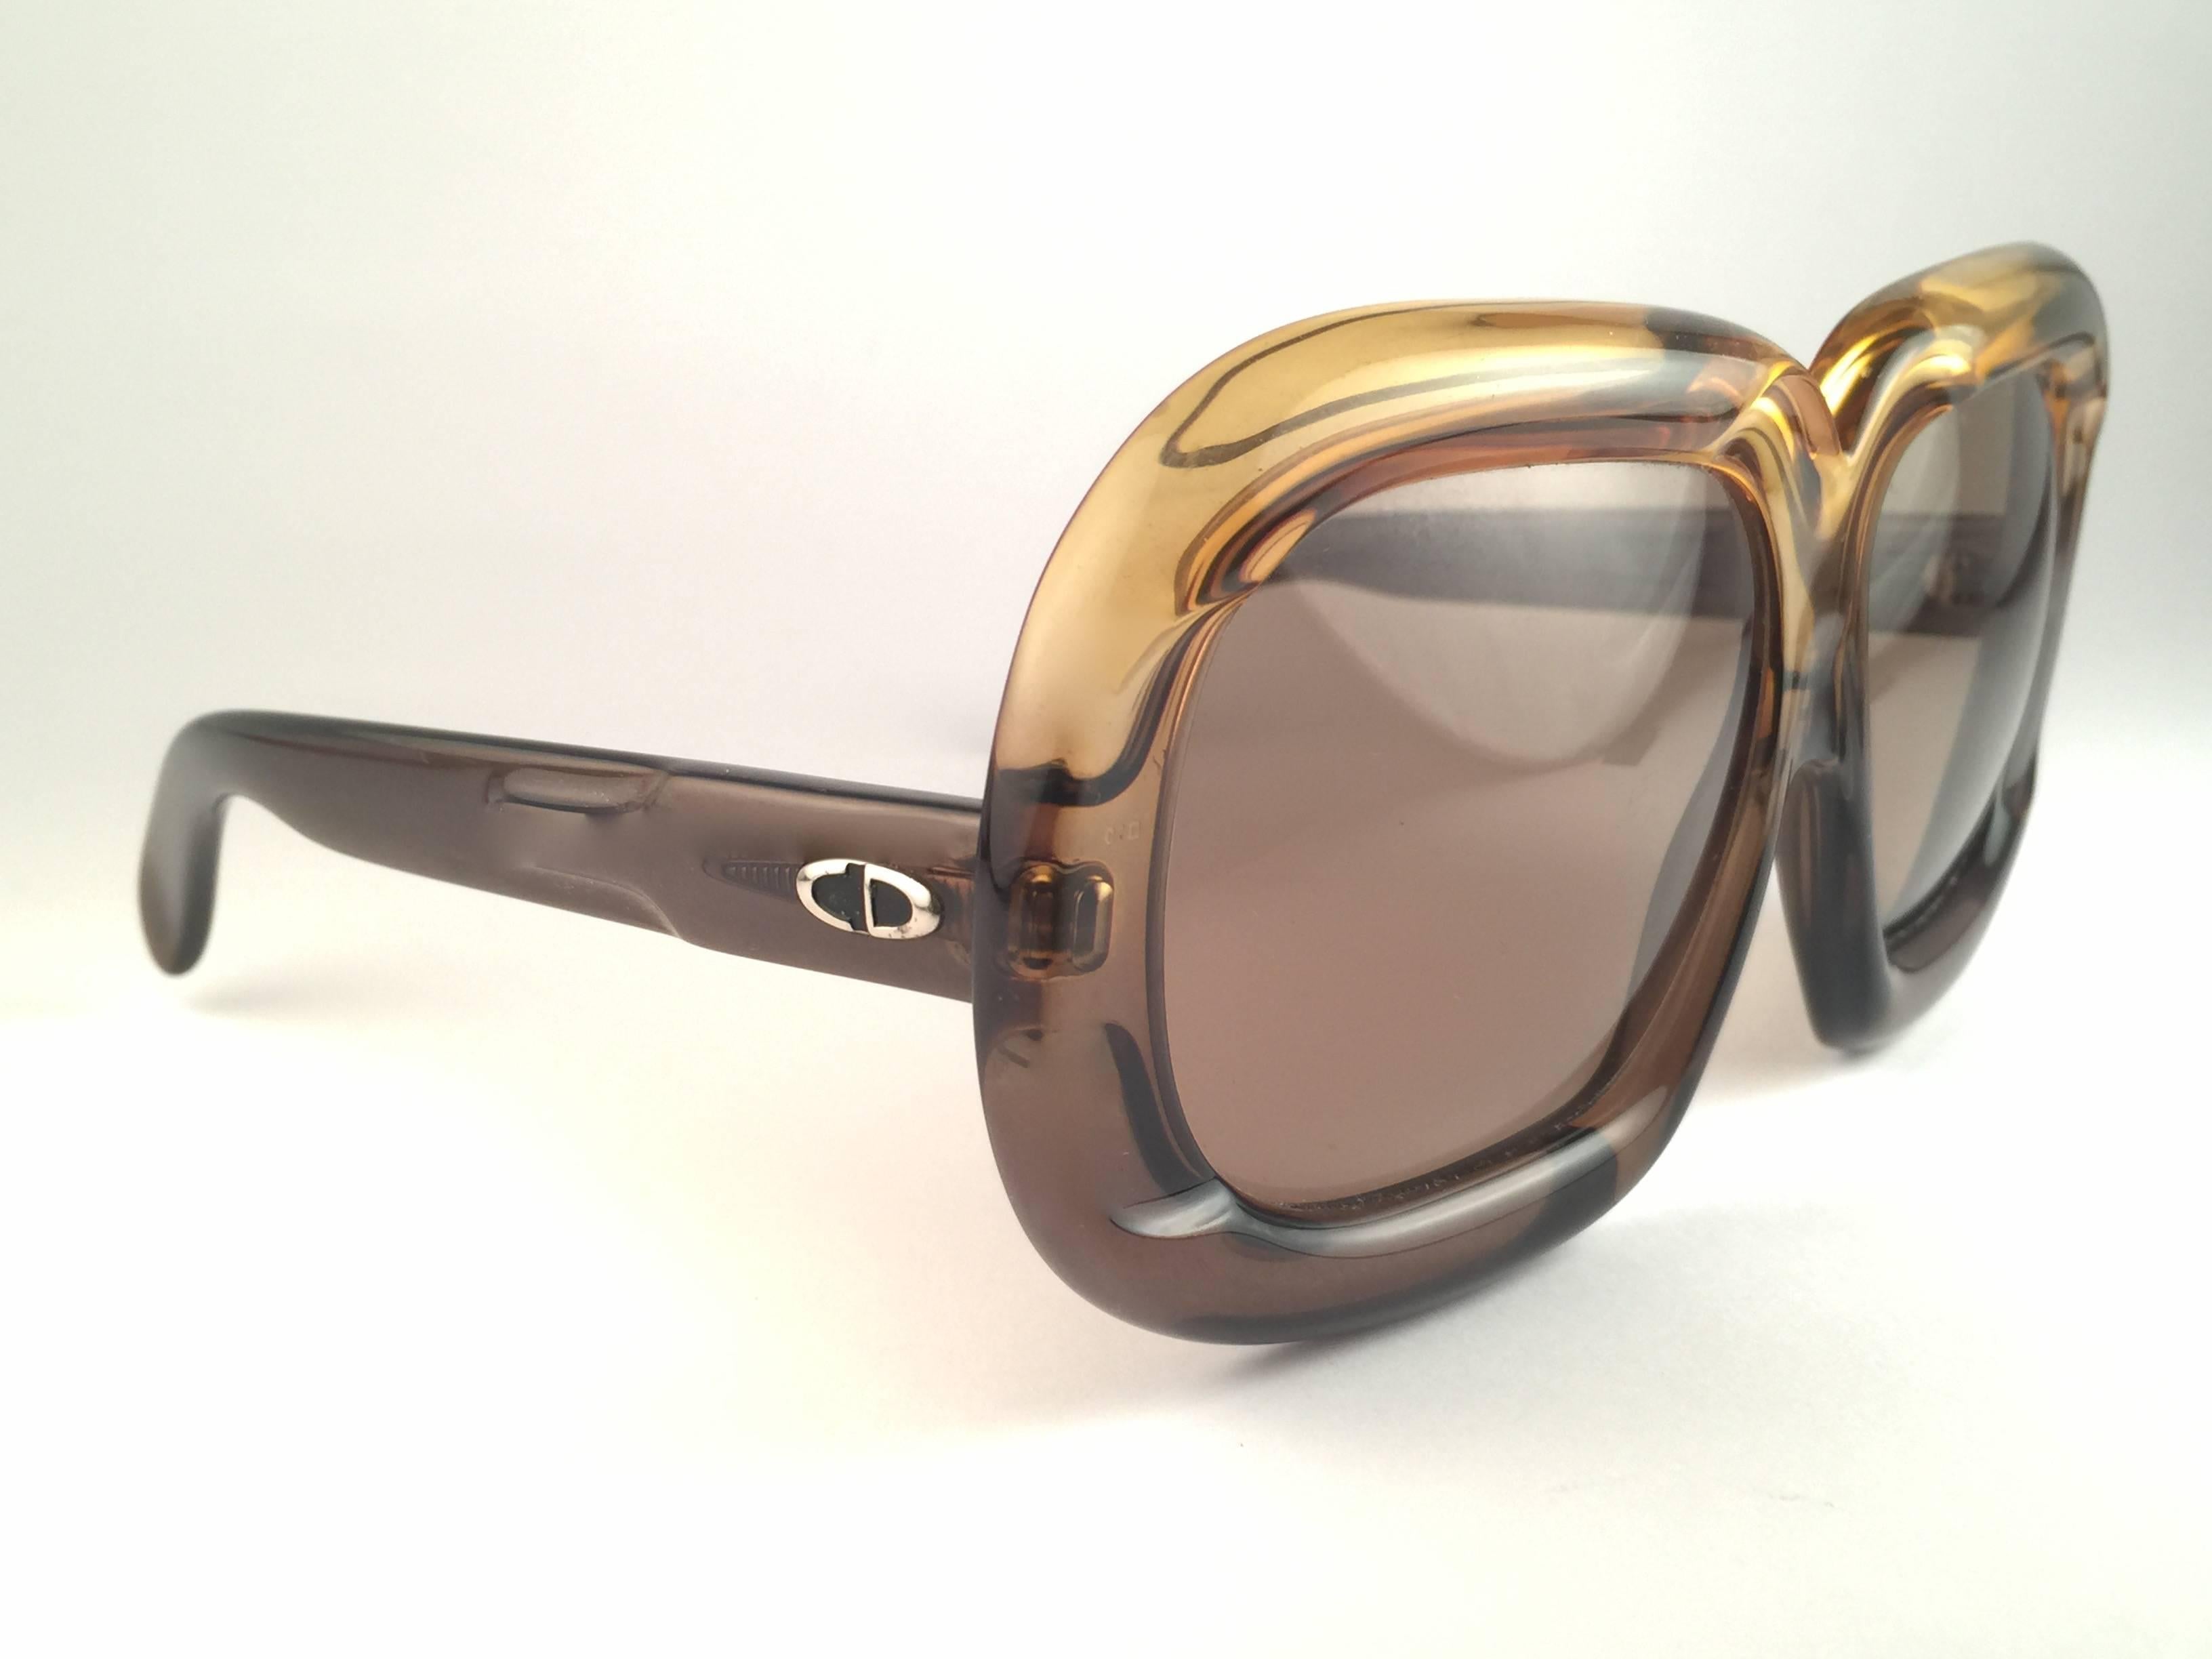 New Vintage Christian Dior D10 Oversized two tone ombre frame sporting spotless solid brown lenses. 

Made in Germany.
 
Produced and design in 1970's.

New, never worn or displayed. Comes with its original silver Christian Dior Lunettes sleeve.